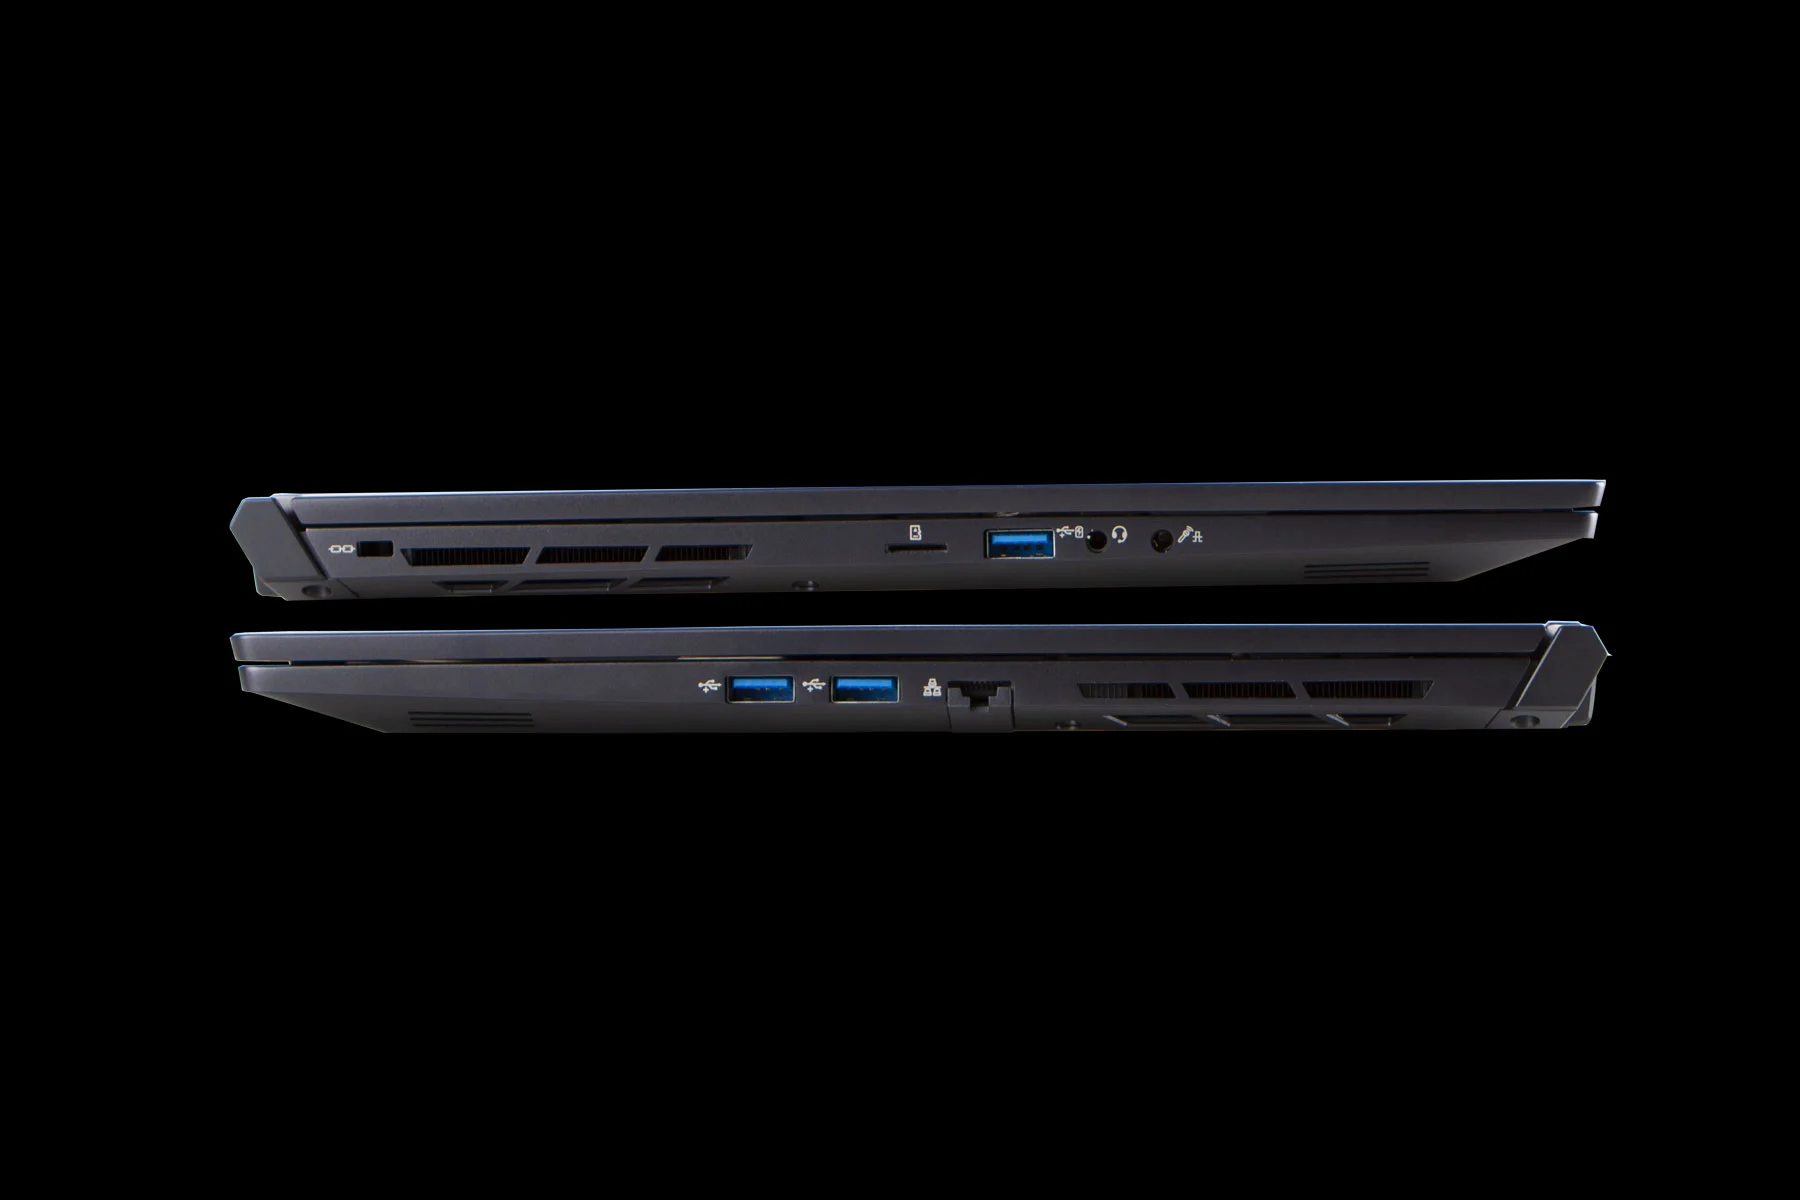 Reign Nomad Gaming Laptop Connectivity